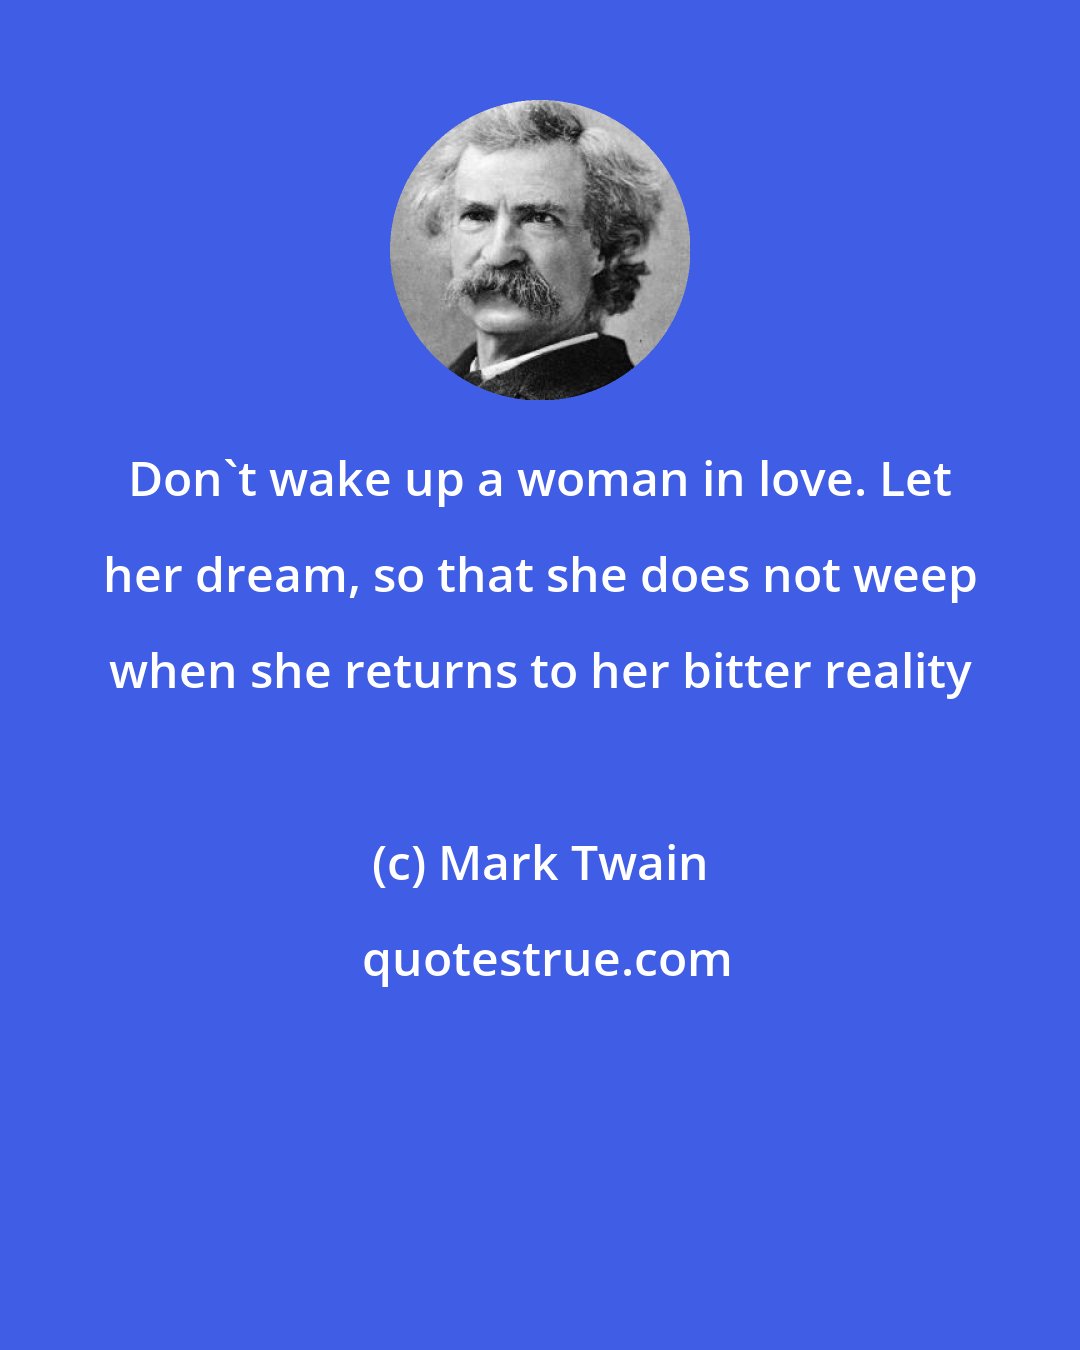 Mark Twain: Don't wake up a woman in love. Let her dream, so that she does not weep when she returns to her bitter reality